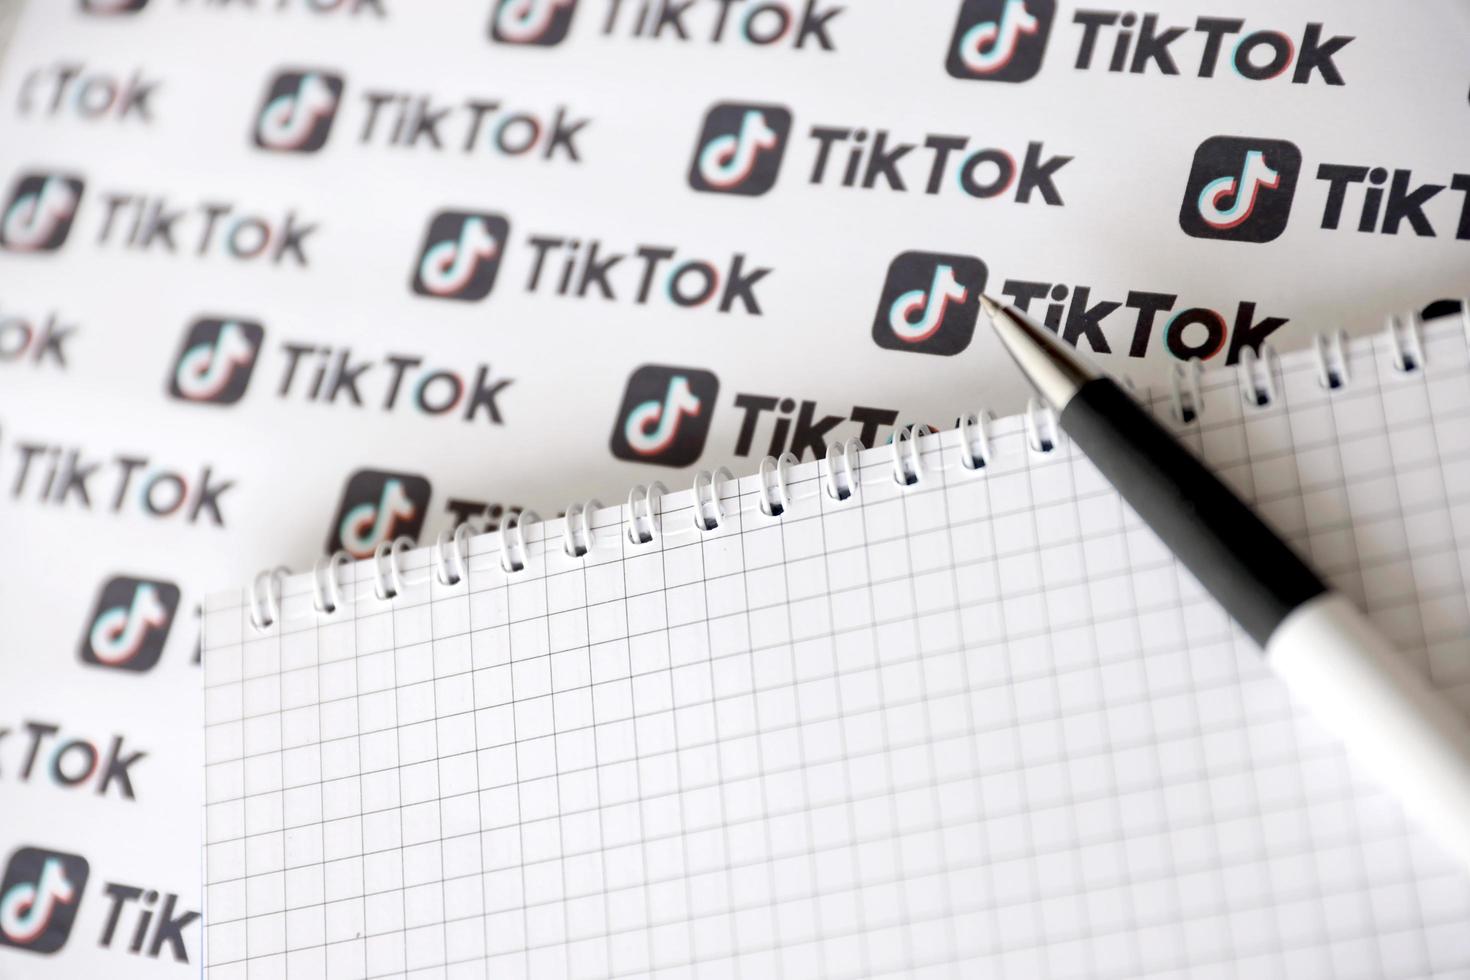 TERNOPIL, UKRAINE - MAY 2, 2022 Notepad with pen and Many TikTok logo printed on paper. Tiktok or Douyin is a famous Chinese short-form video hosting service owned by ByteDance photo